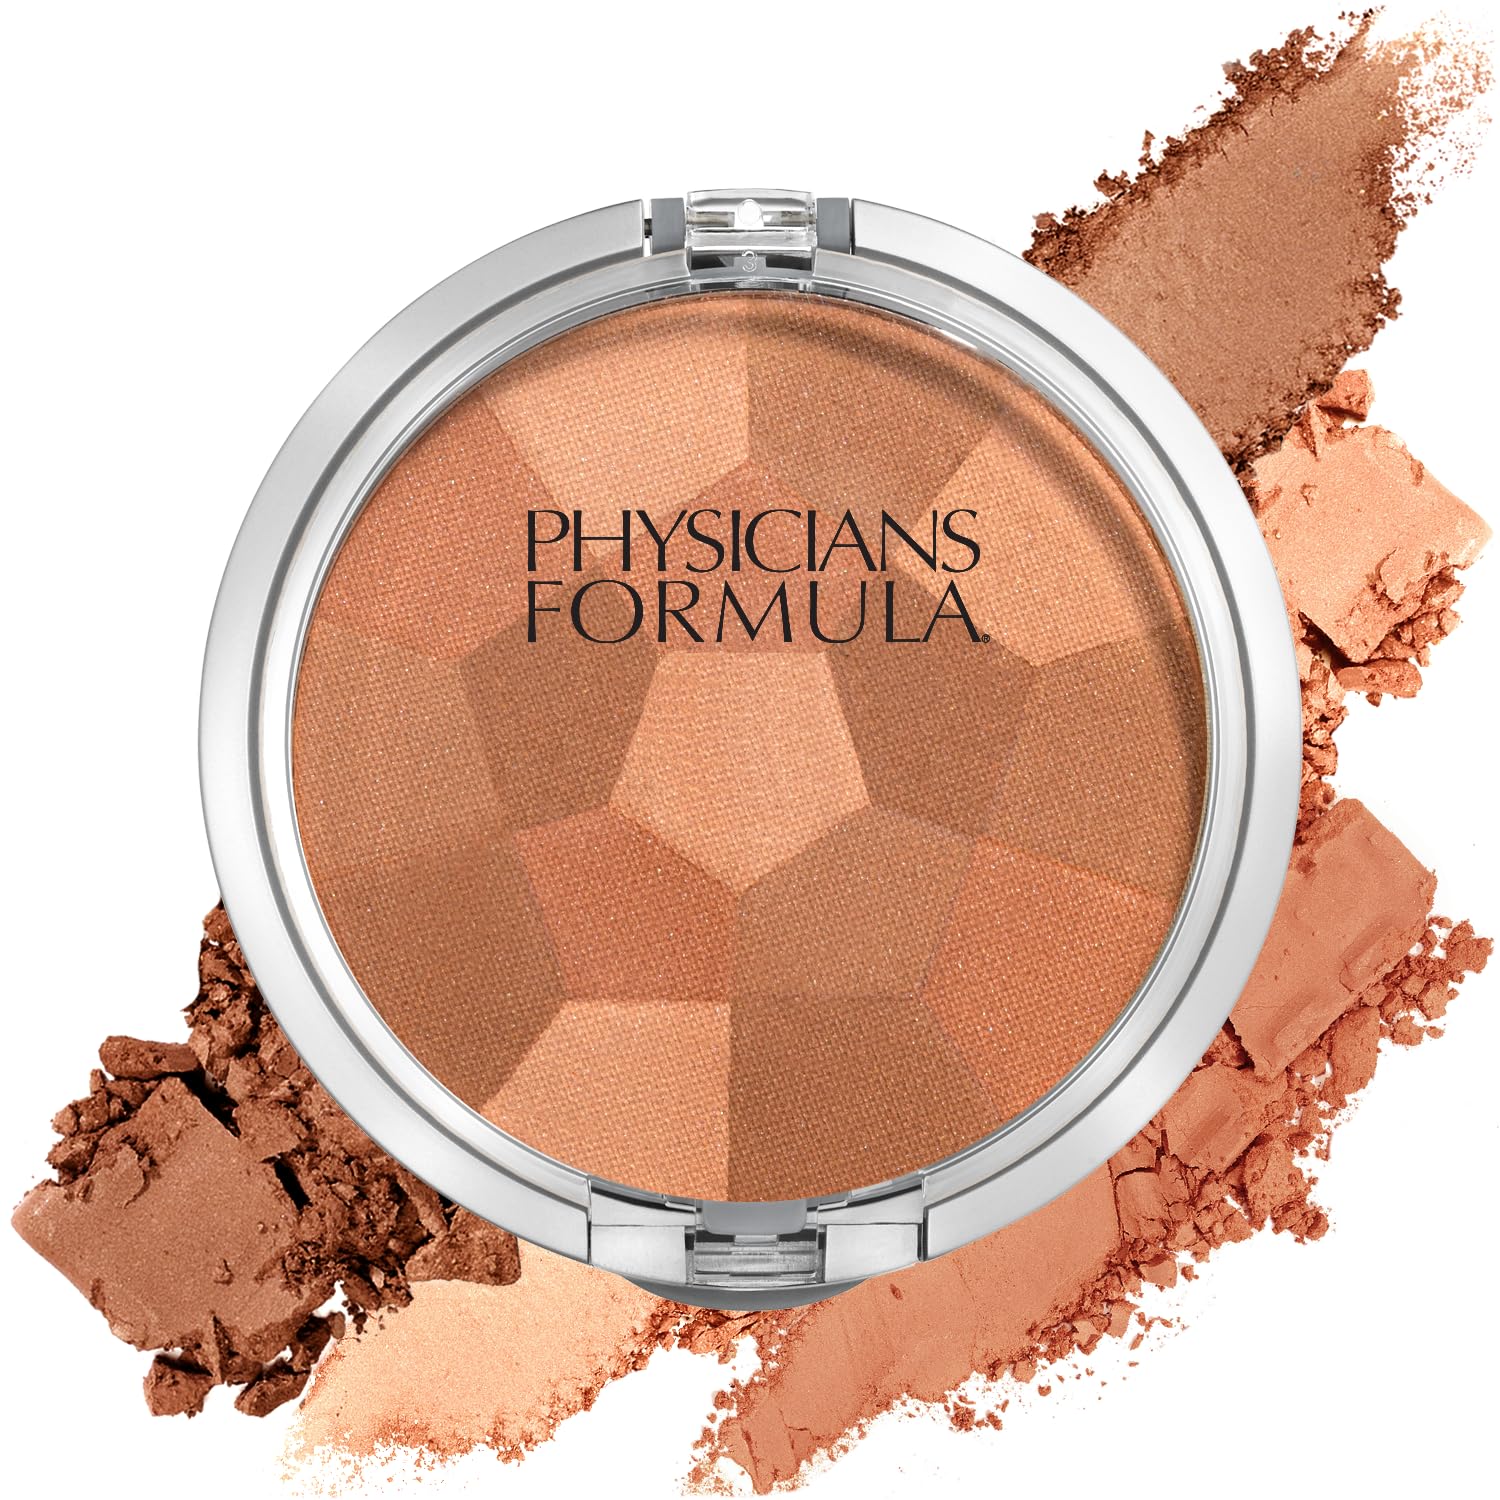 Physicians Formula Powder Palette Multi-Colored Blush Powder (Blushing Natural) $3.20 w/ S&S + Free Shipping w/ Prime or on $35+